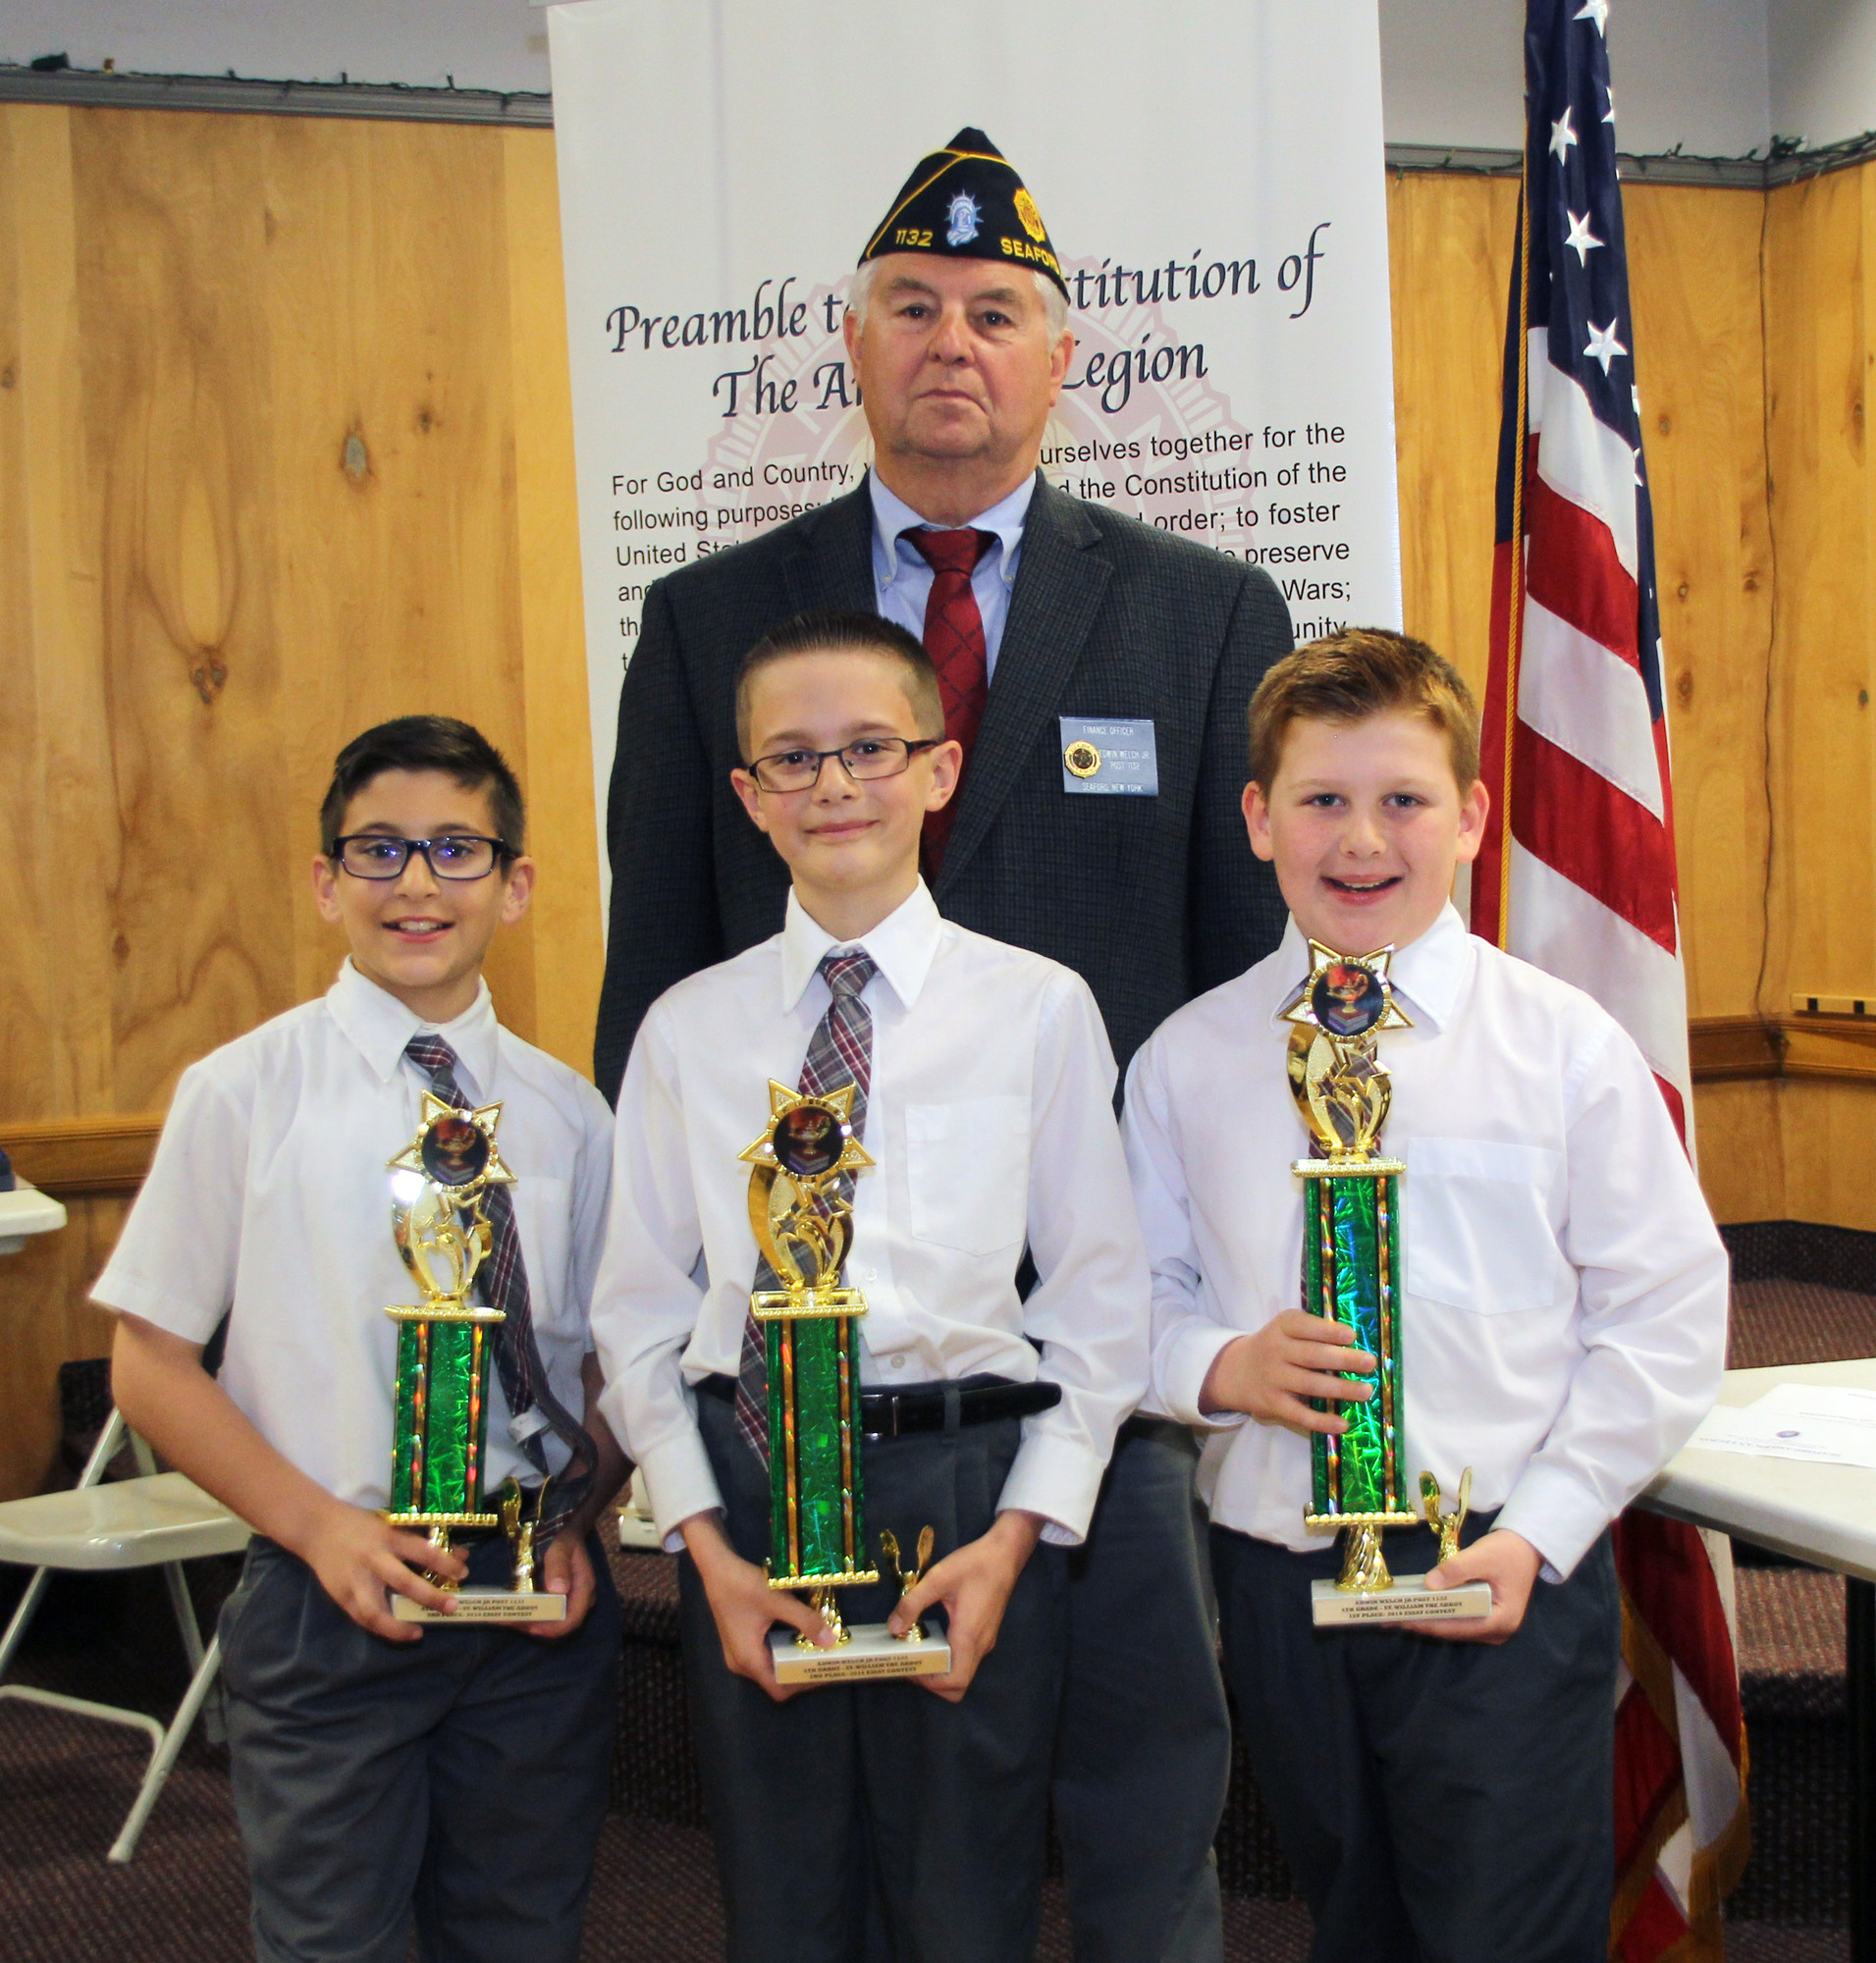 Legionnaire March Caleco with the St. William the Abbot School fourth-grade winners of the Seaford American Legion Essay Contest 1st Place Nolan Papagno, 2nd Place Ryan Miller and 3rd Place Salvatore Caputo